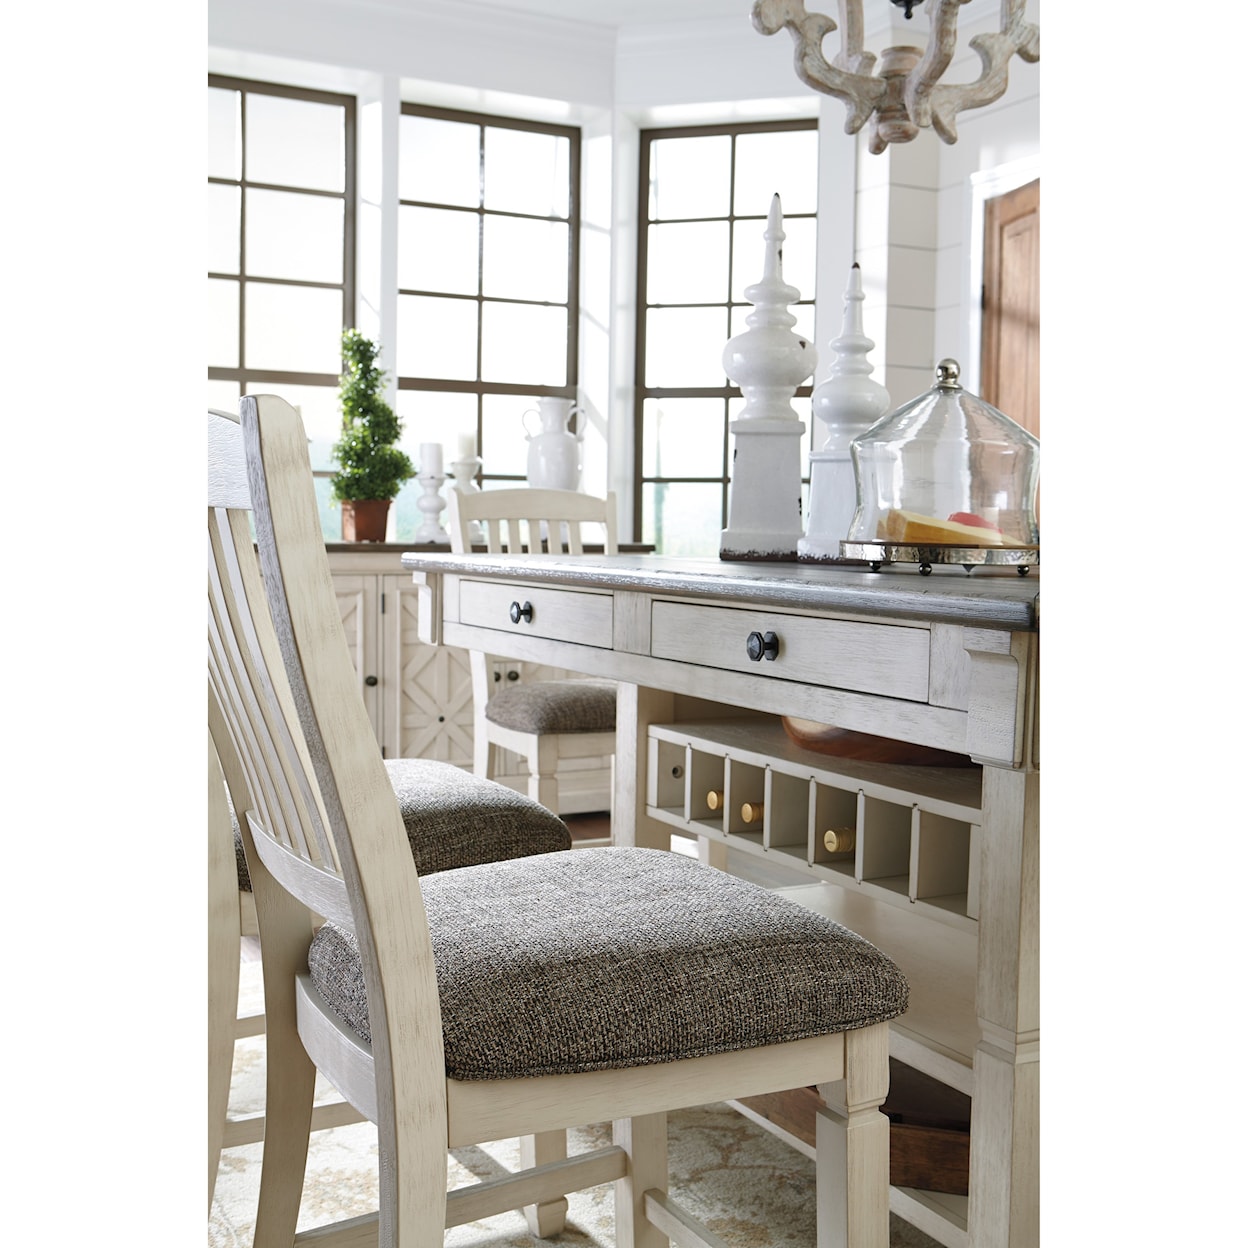 Signature Design by Ashley Bolanburg Rectangular Dining Room Counter Table